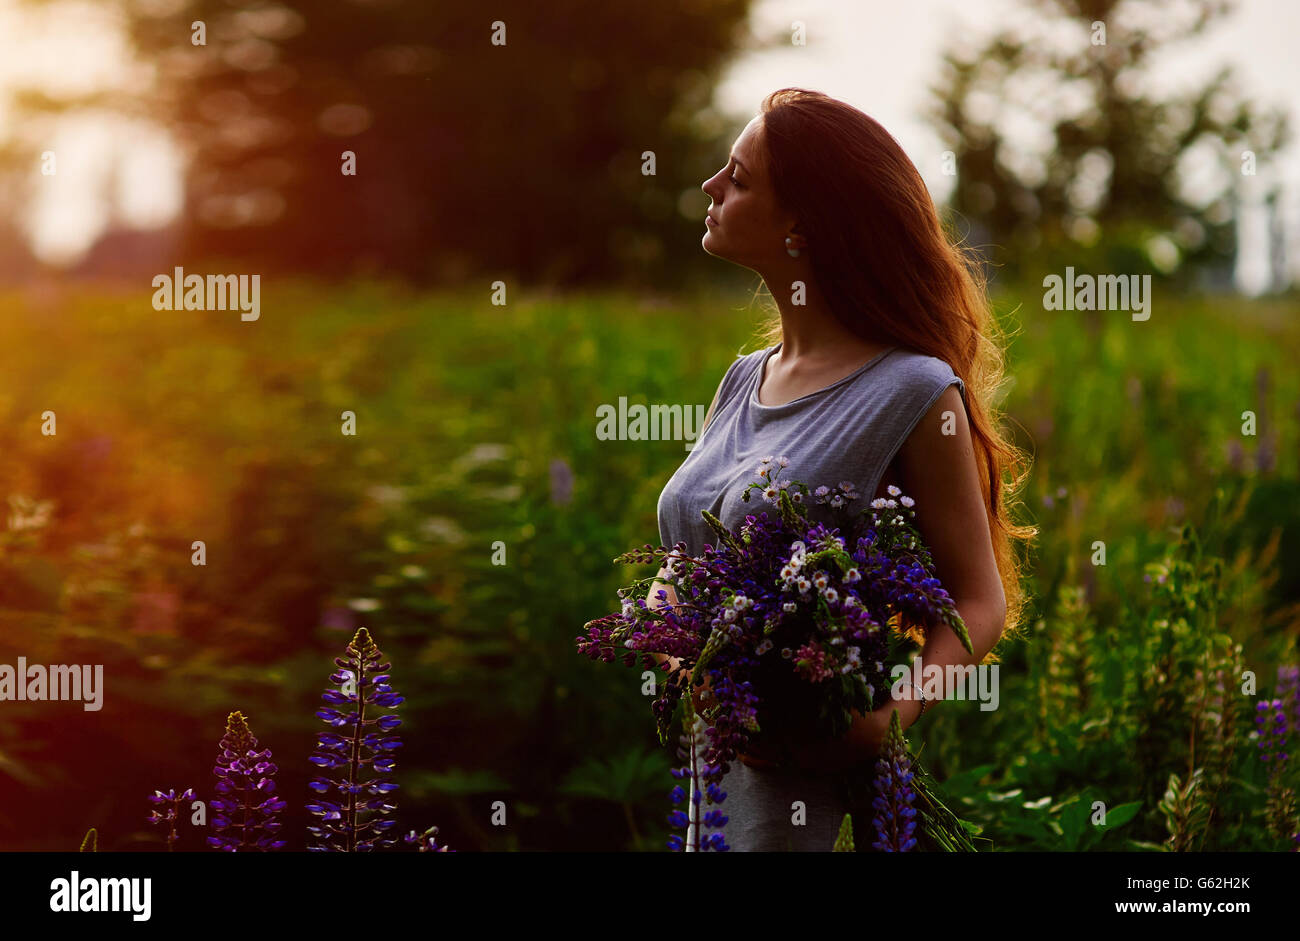 Woman holding a bouquet of blue lupine flowers Stock Photo